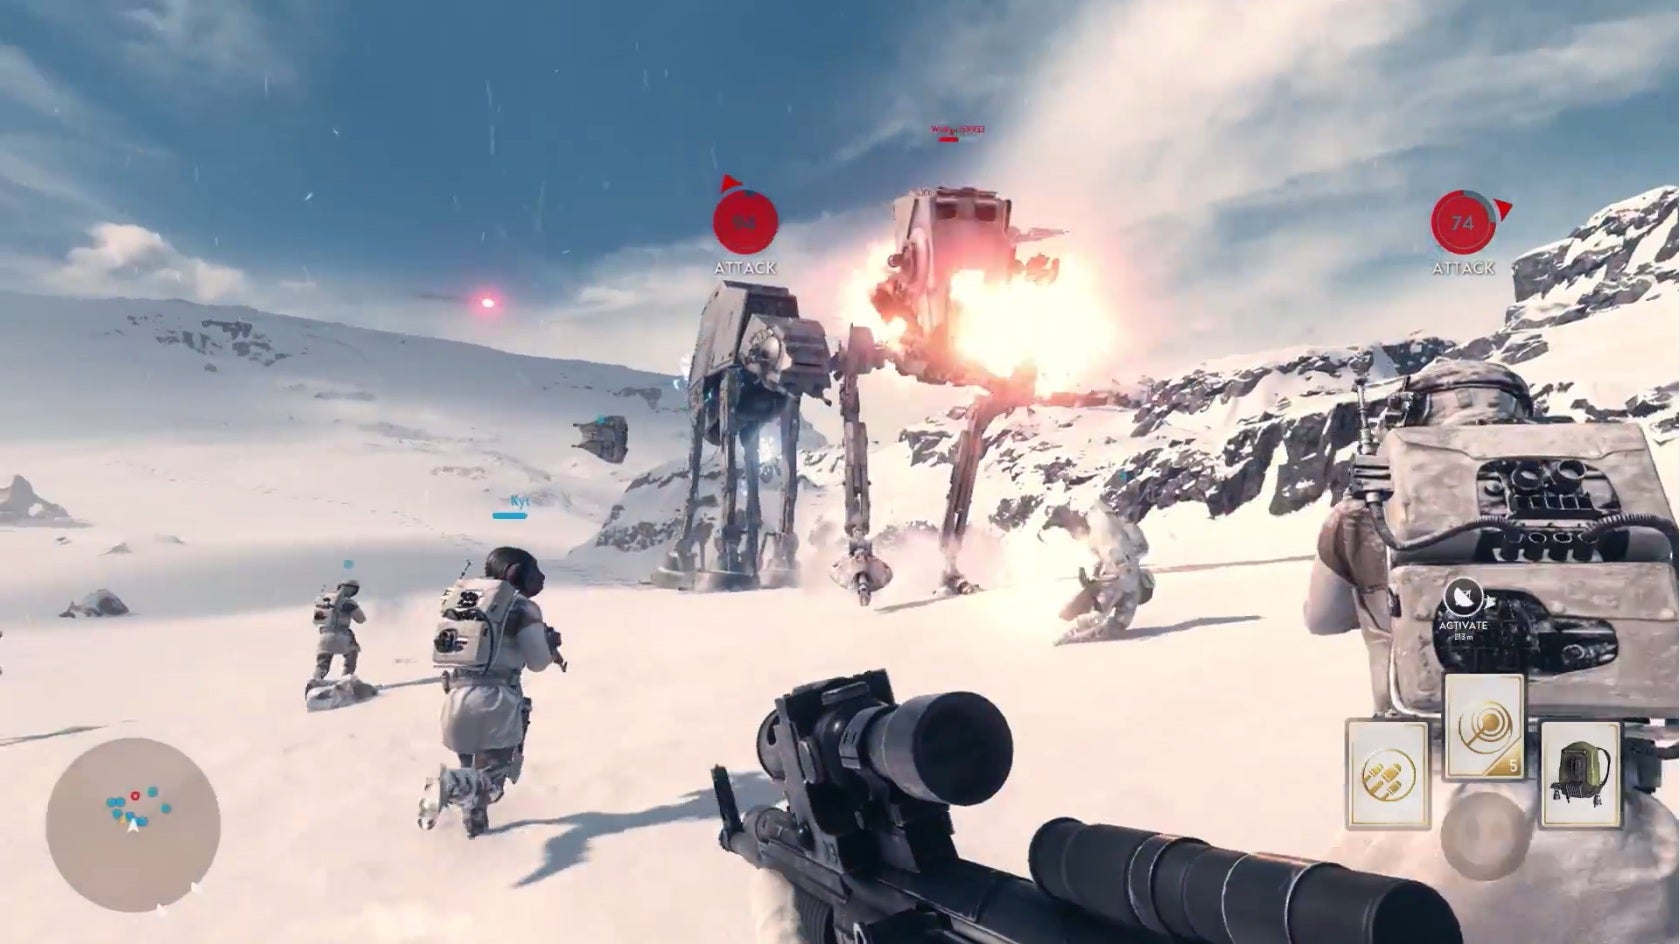 Pekkadillo møl Arbejdsløs The gameplay trailer for Star Wars Battlefront looks incredible | The  Independent | The Independent